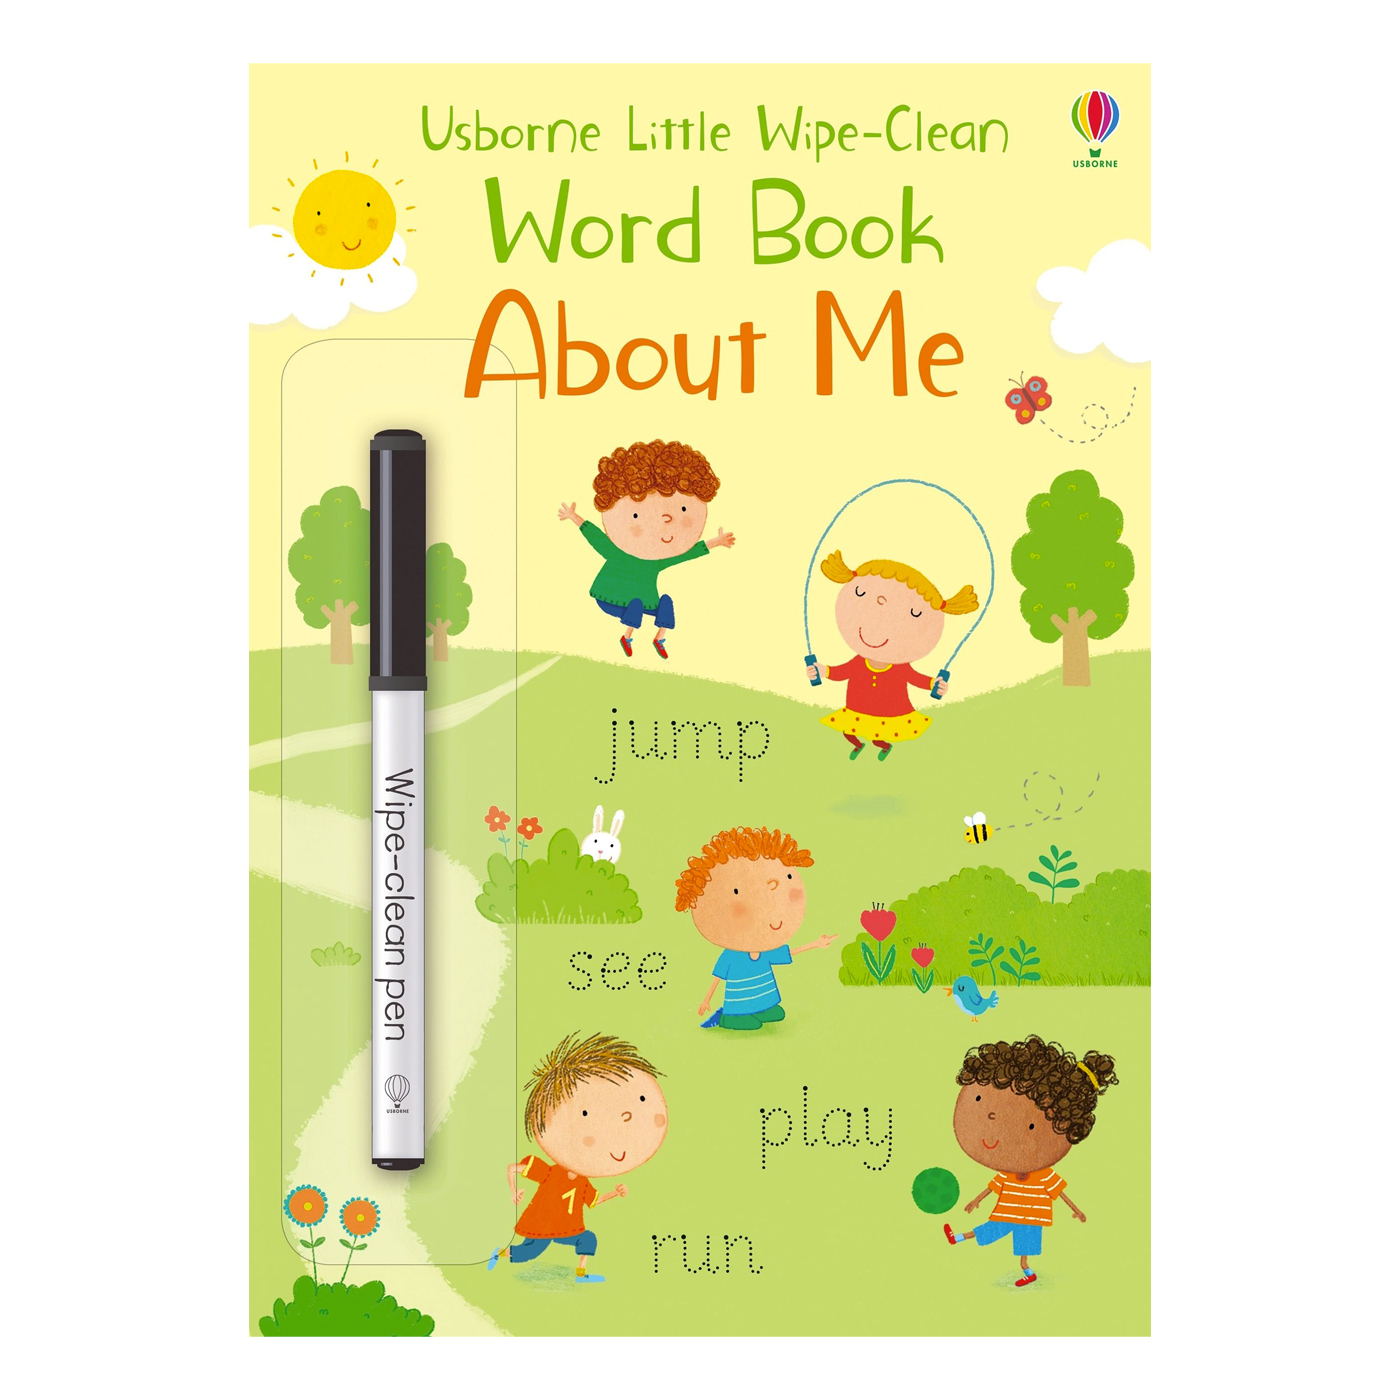 USBORNE Little Wipe-Clean Word Book About Me